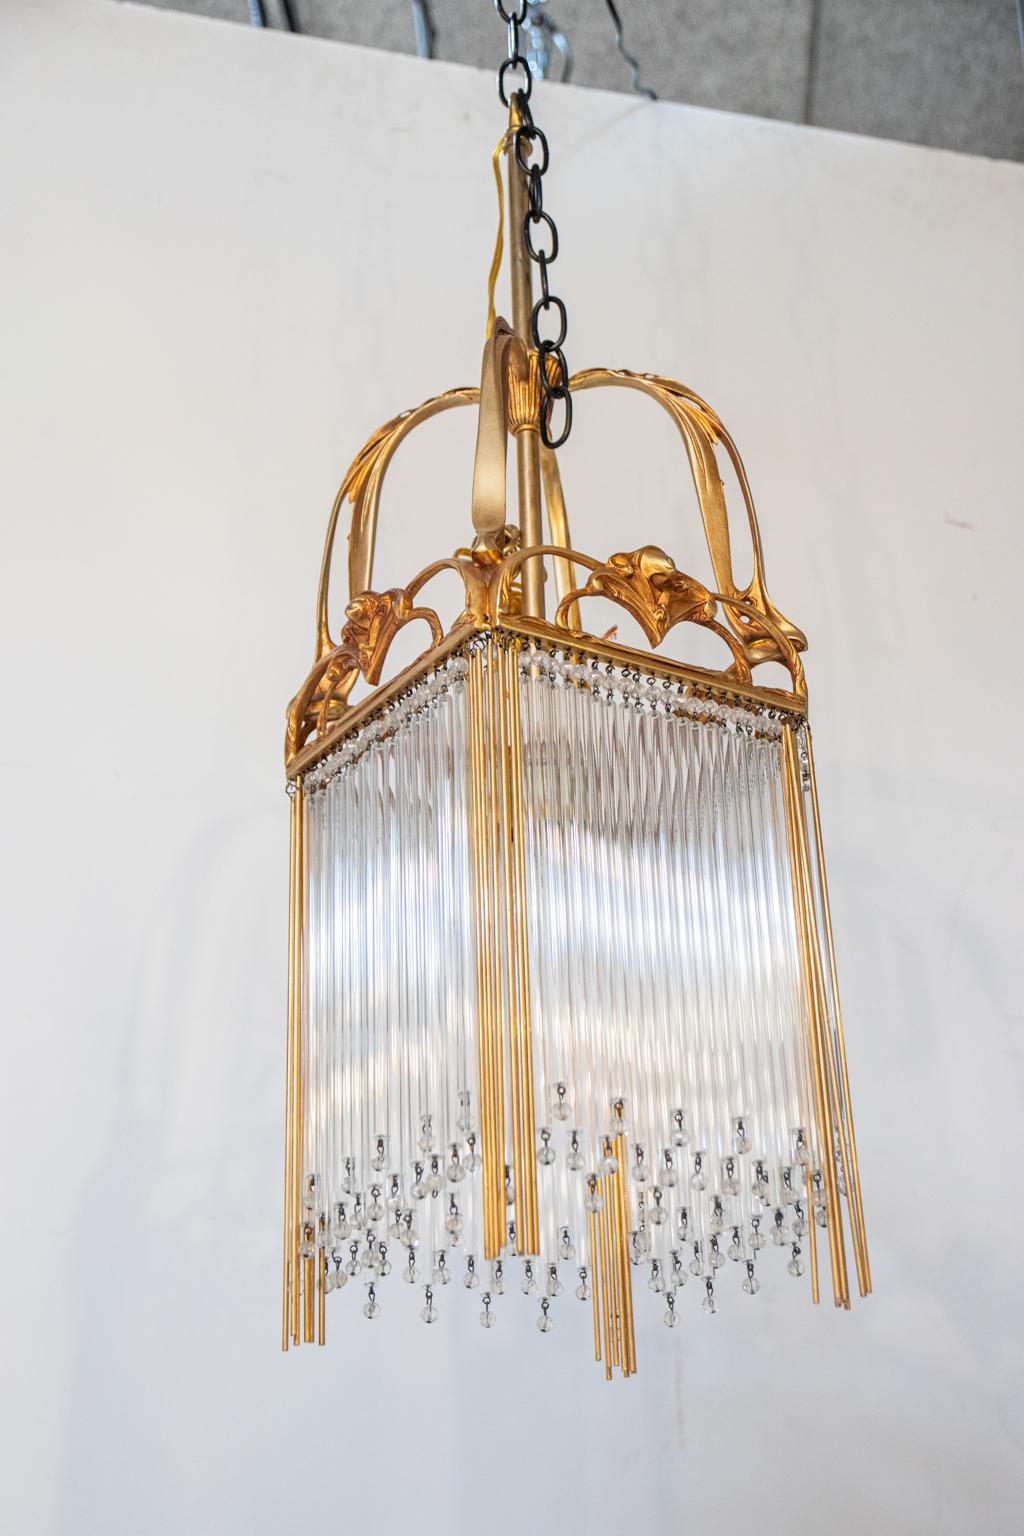 1930s Art Nouveau Gilt Bronze Chandelier with Prisms In Good Condition For Sale In Stamford, CT